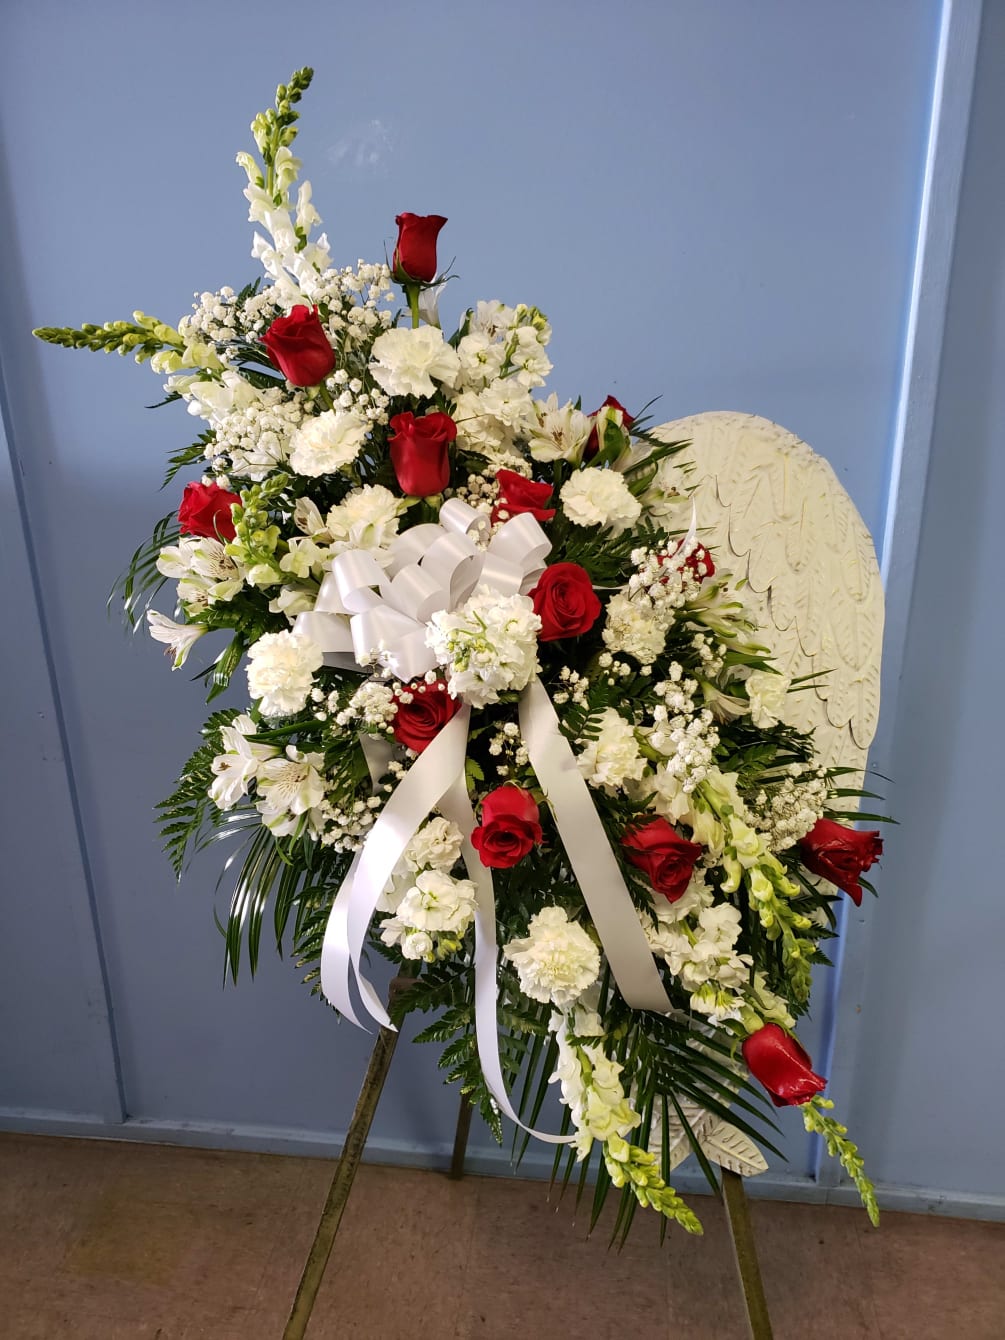 This is a lavish design with red roses, white-stock-carnations-snap dragons and beautiful